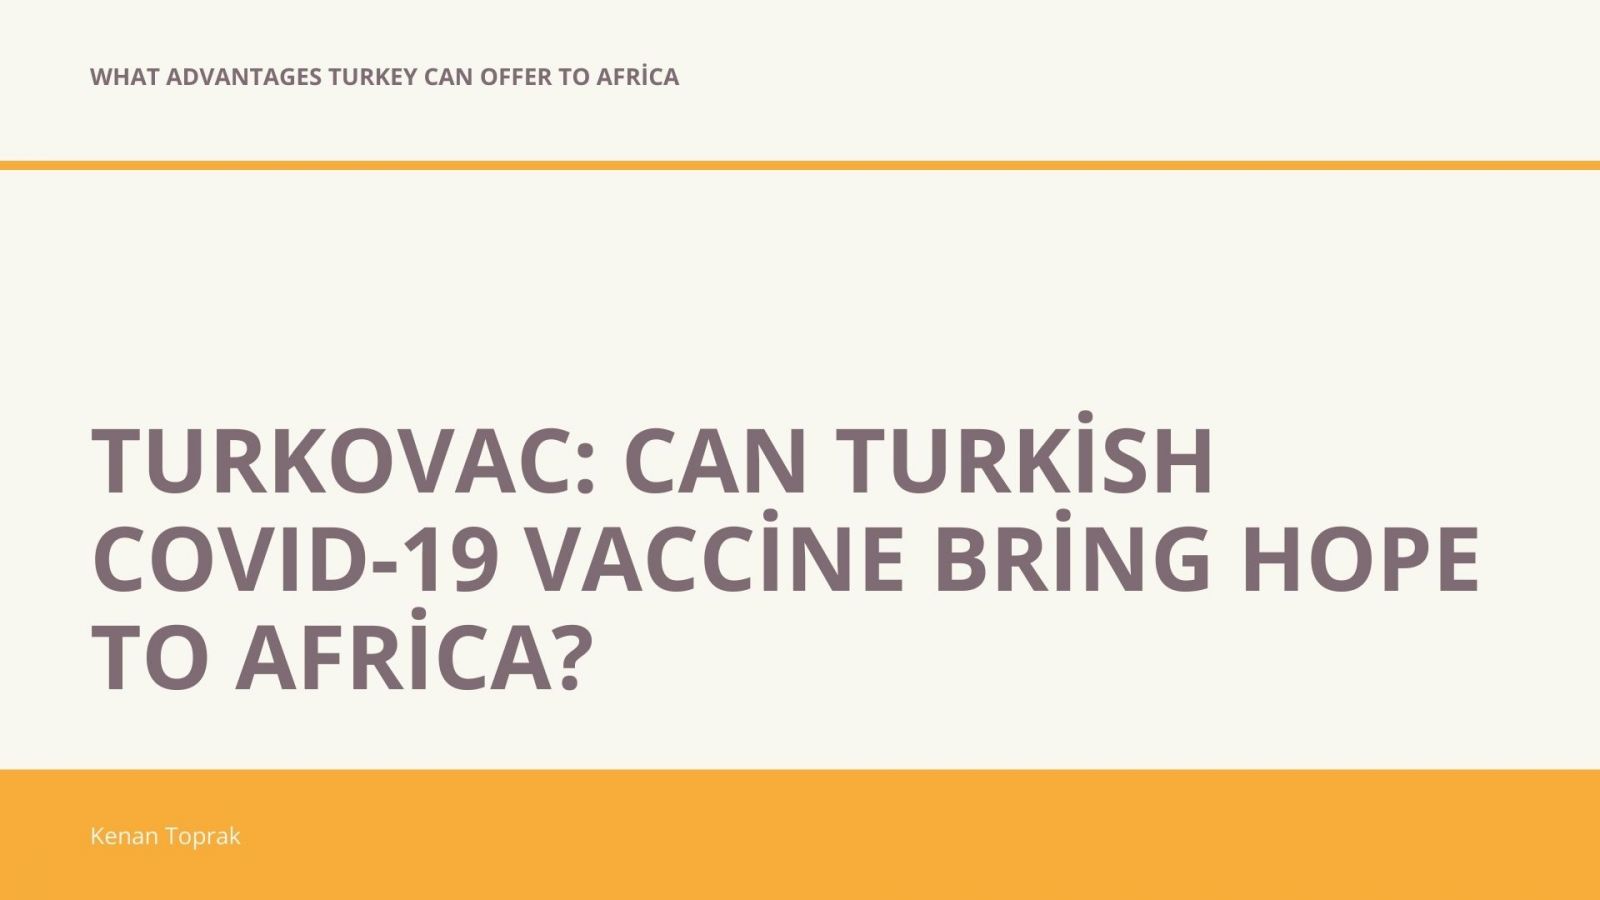 TURKOVAC: Can Turkish COVID-19 Vaccine Bring Hope to Africa?